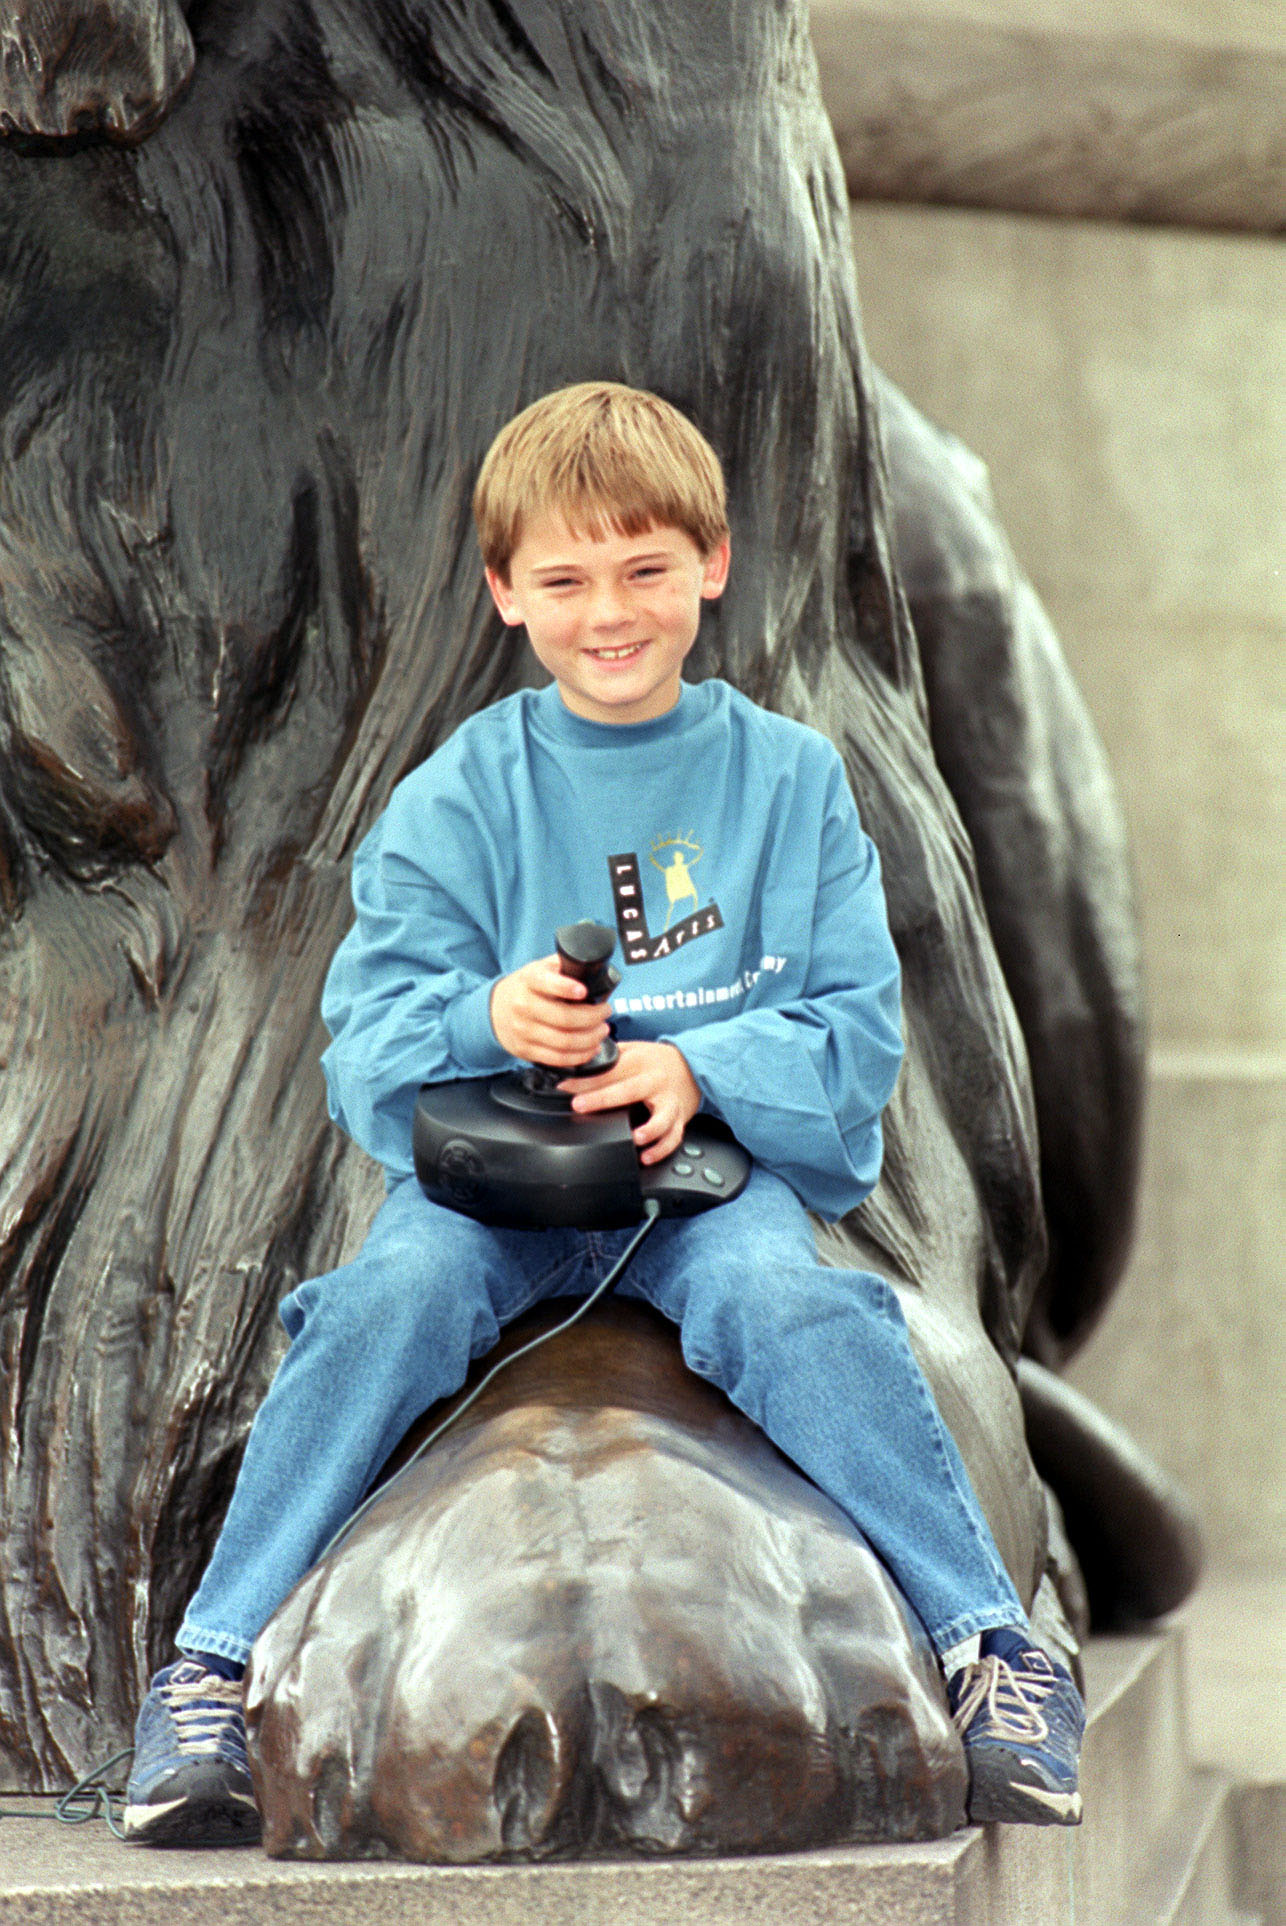 Jake Lloyd lors d'un photocall à Trafalgar Square, Londres, Angleterre | Source : Getty images